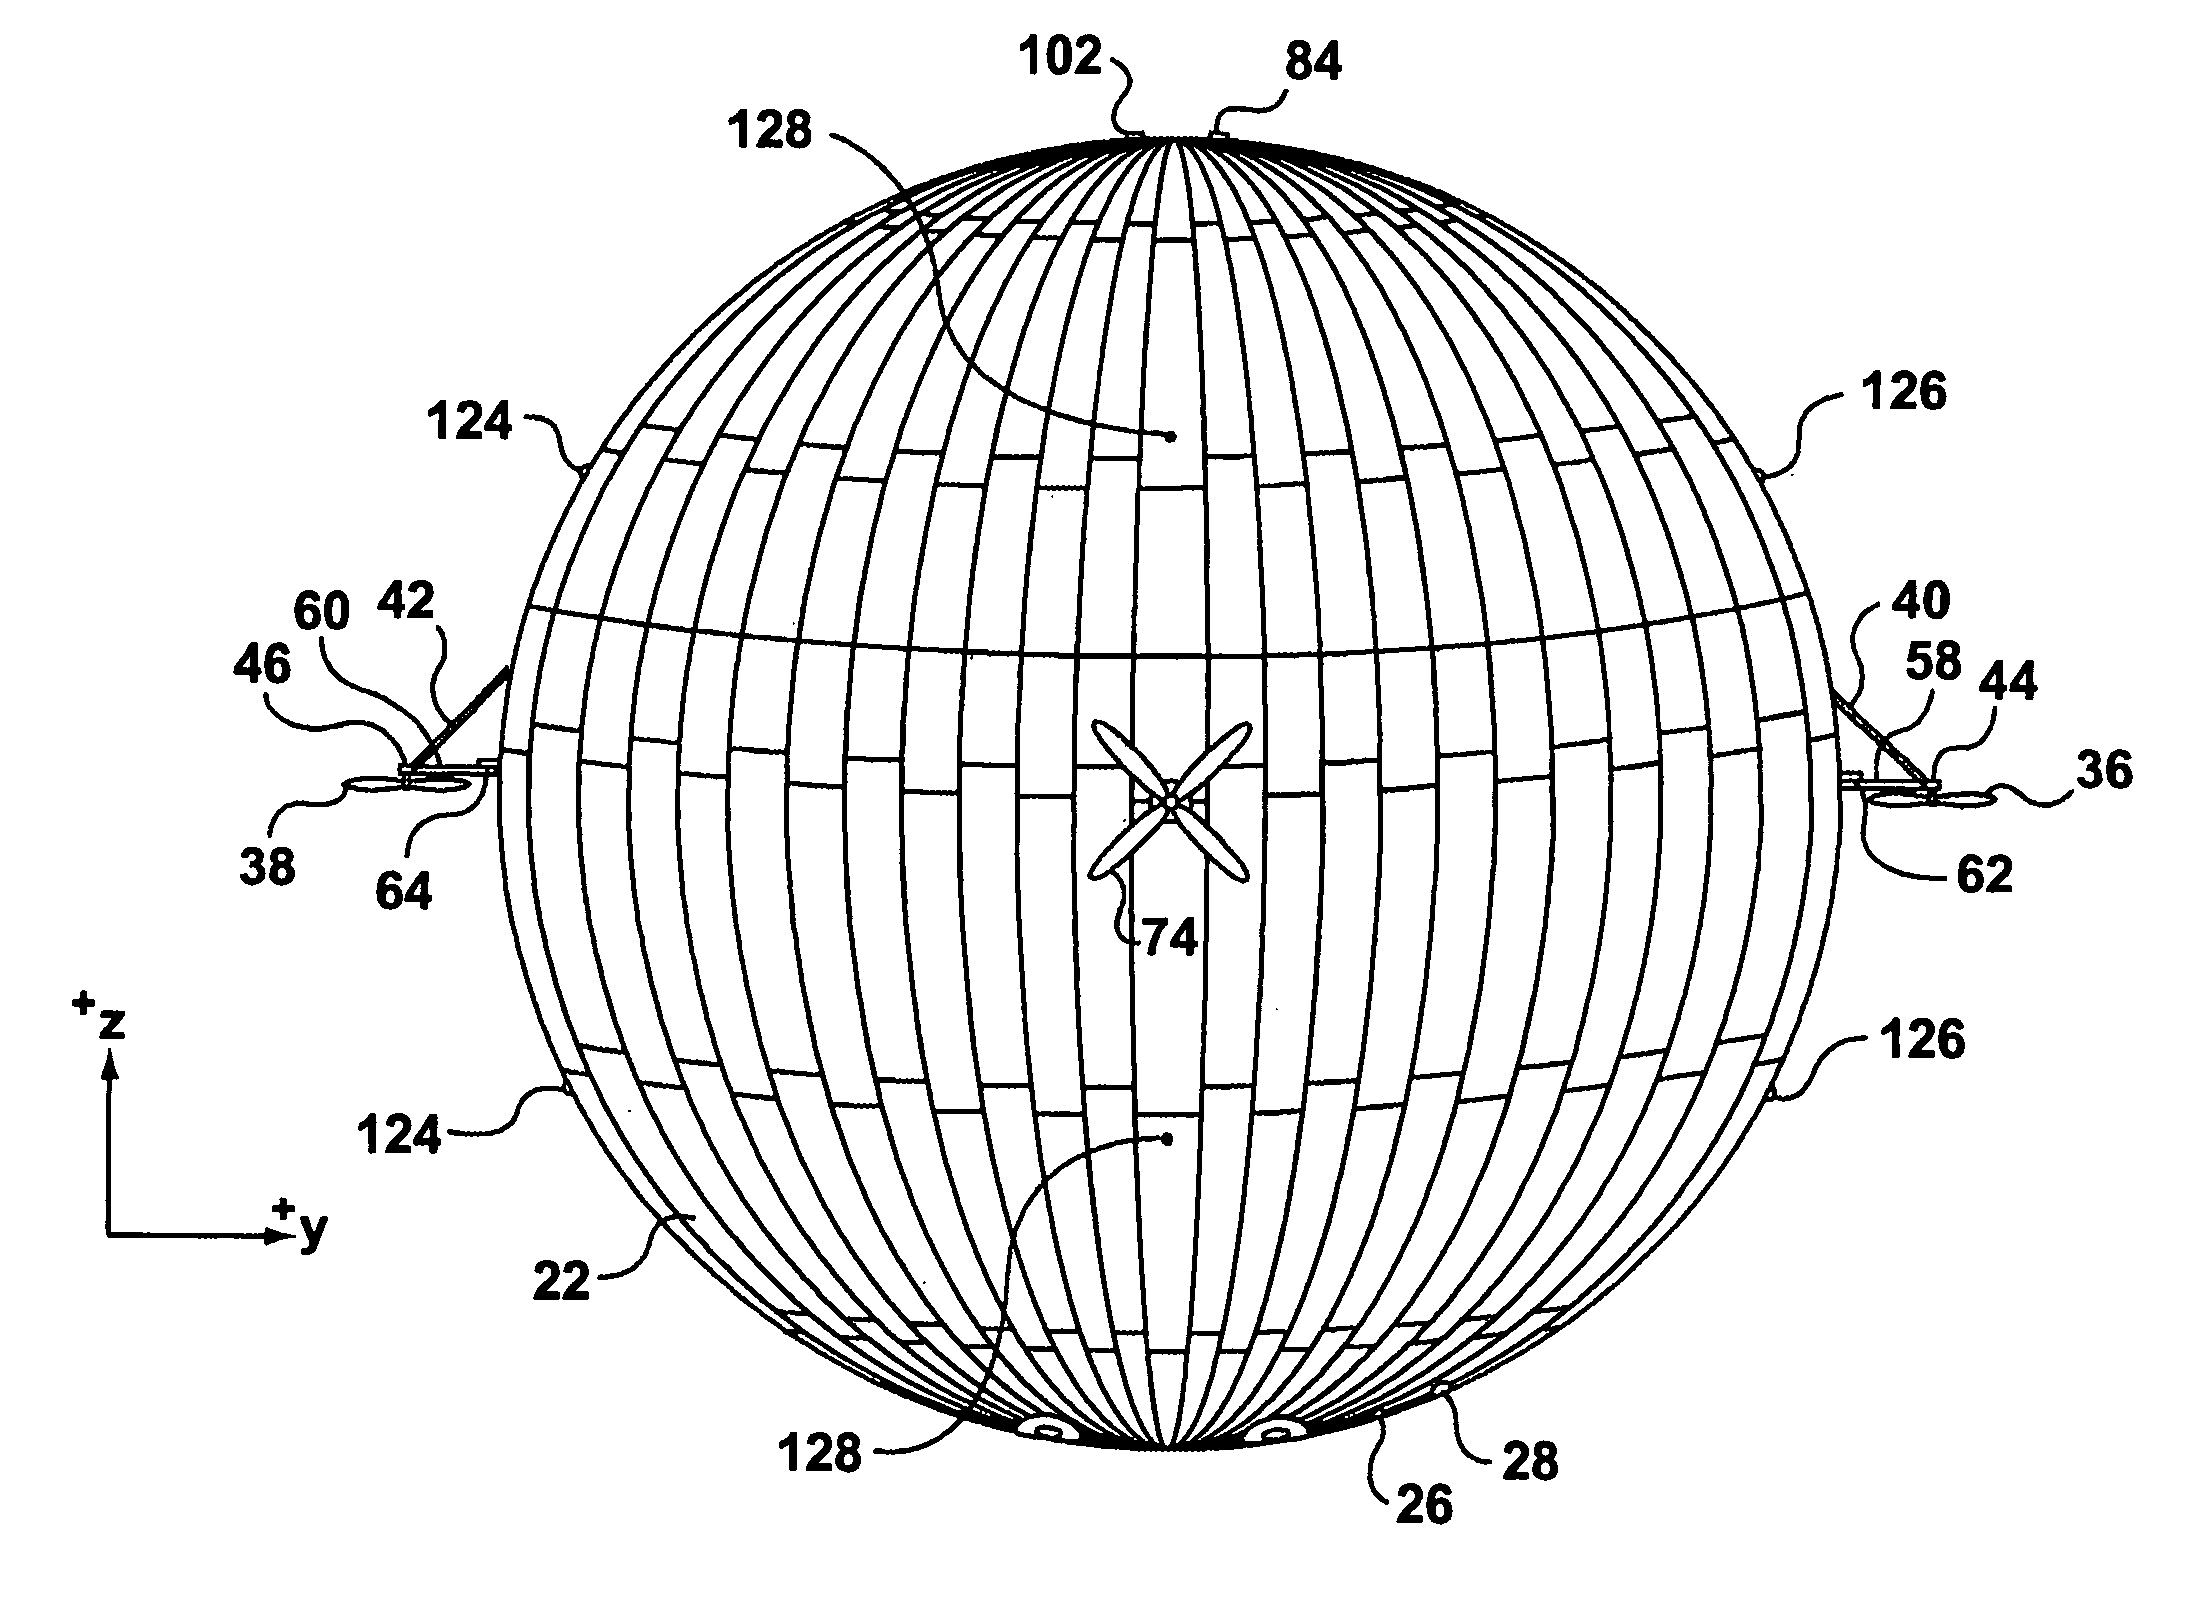 Airship and method of operation